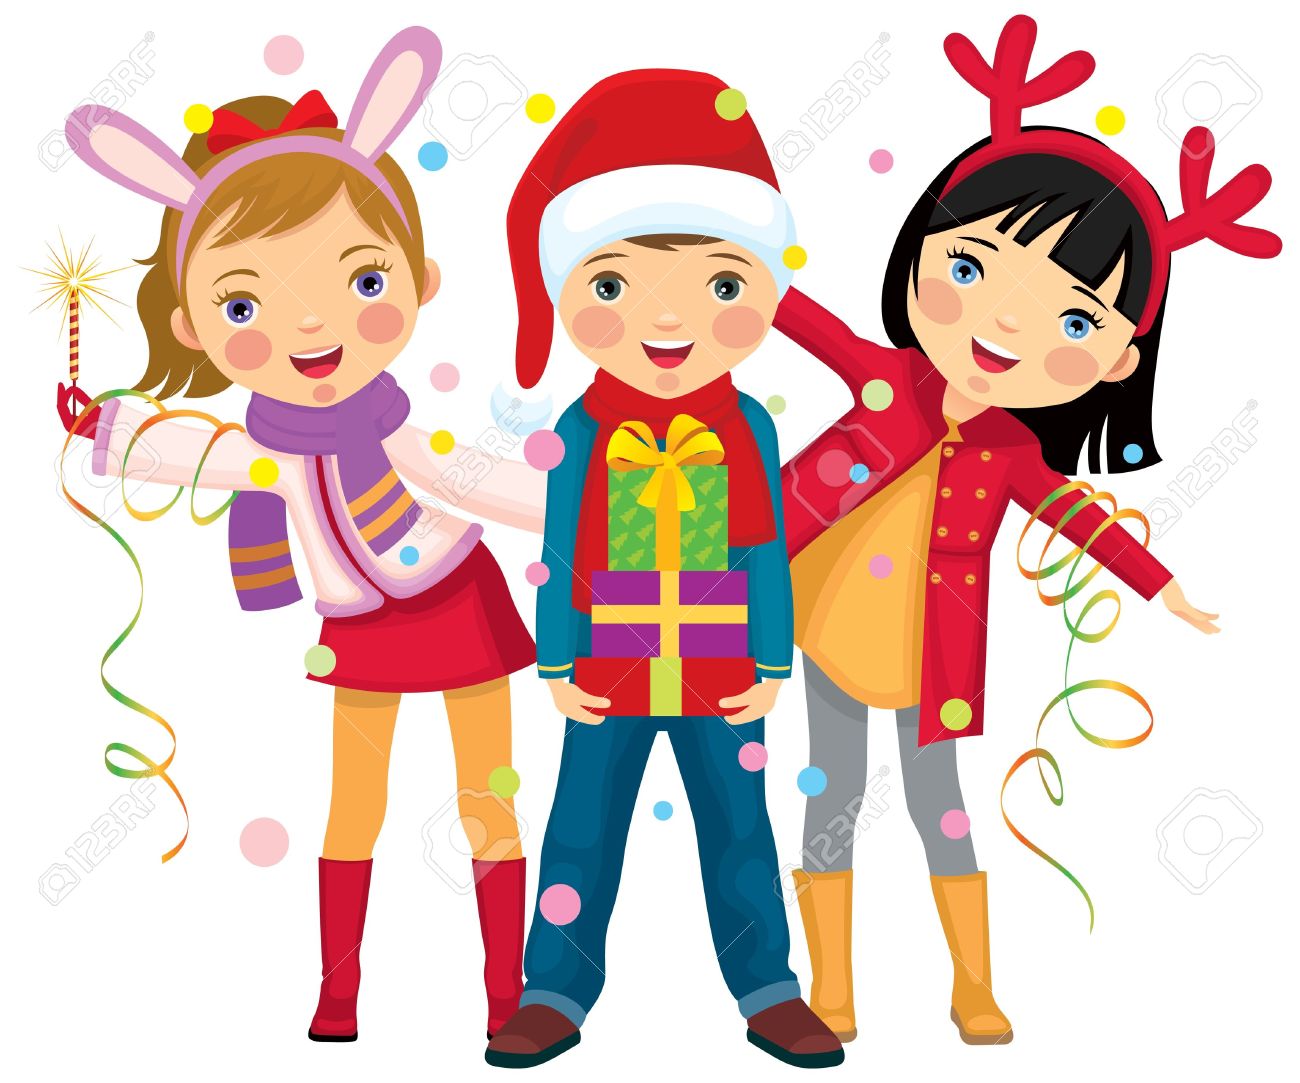 clipart christmas party